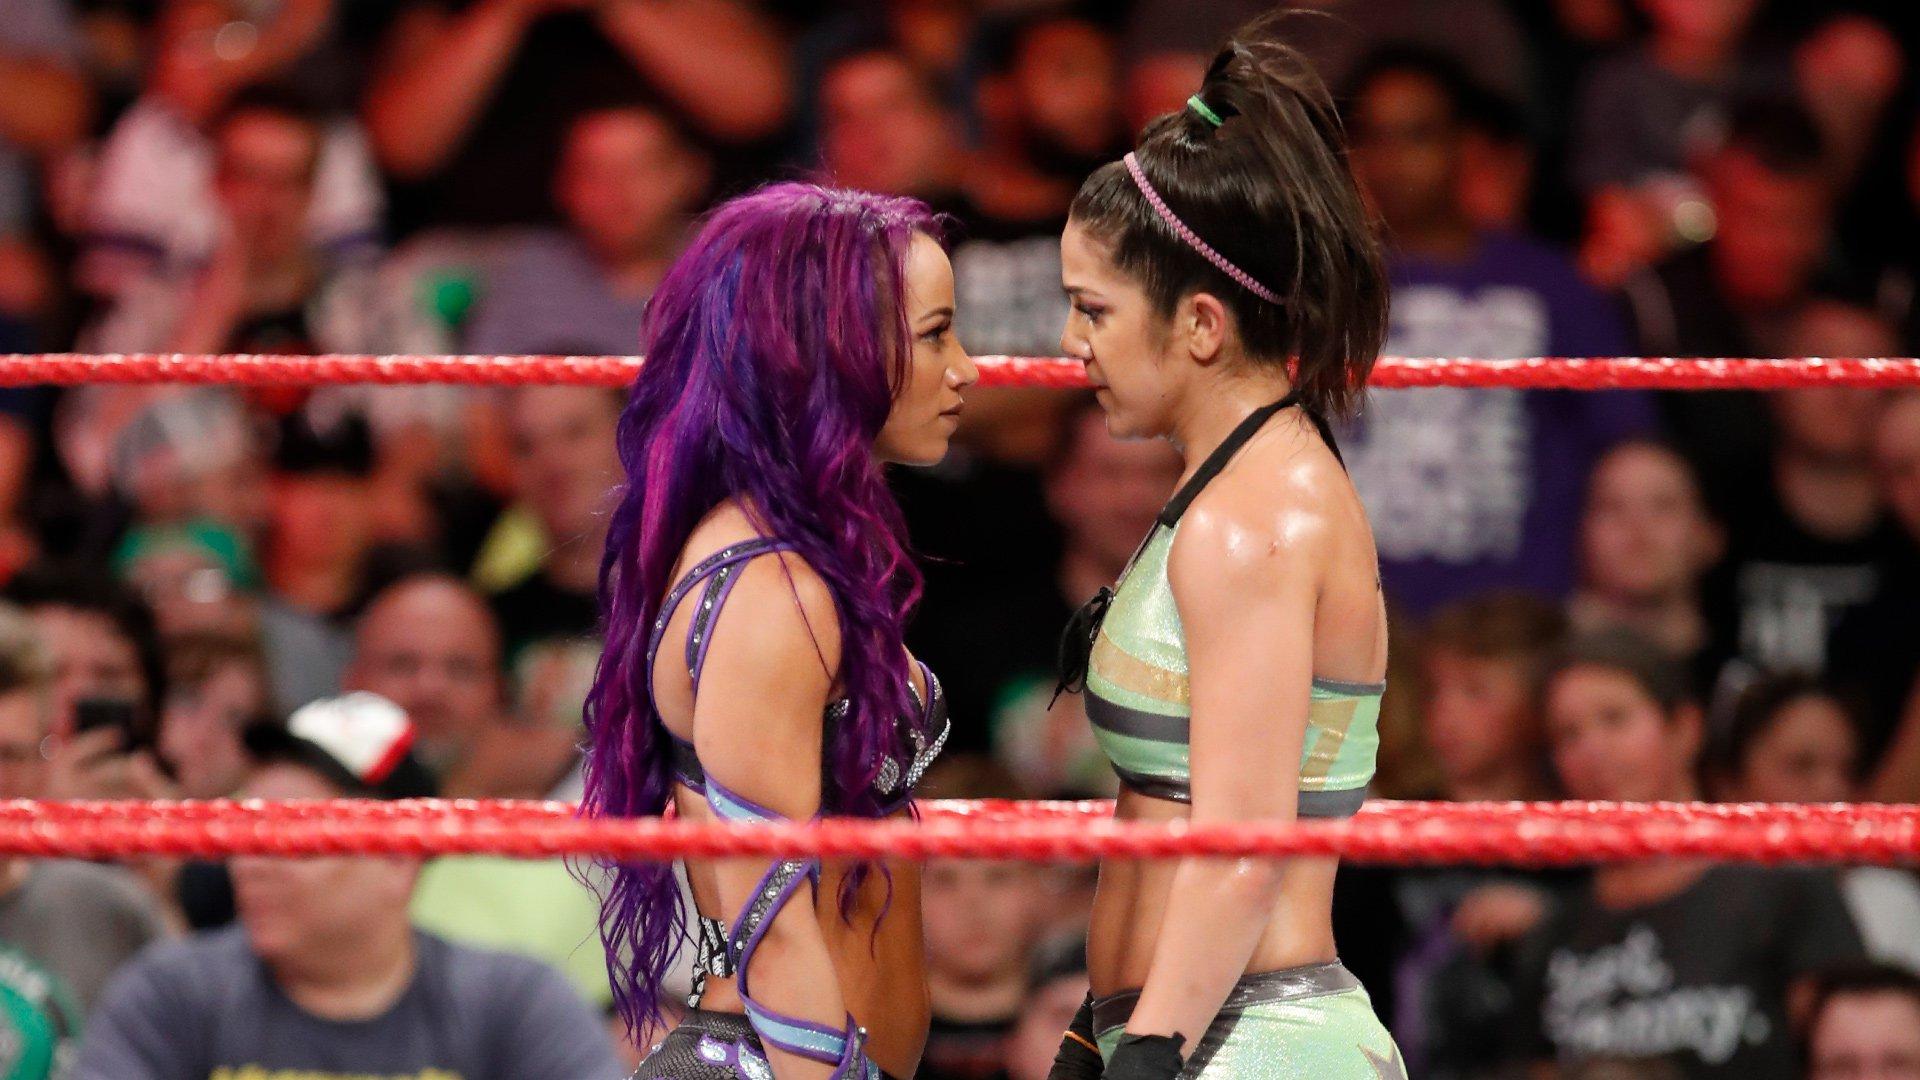 Sasha Banks vs. Bayley could lead to a Four Horsewomen feud